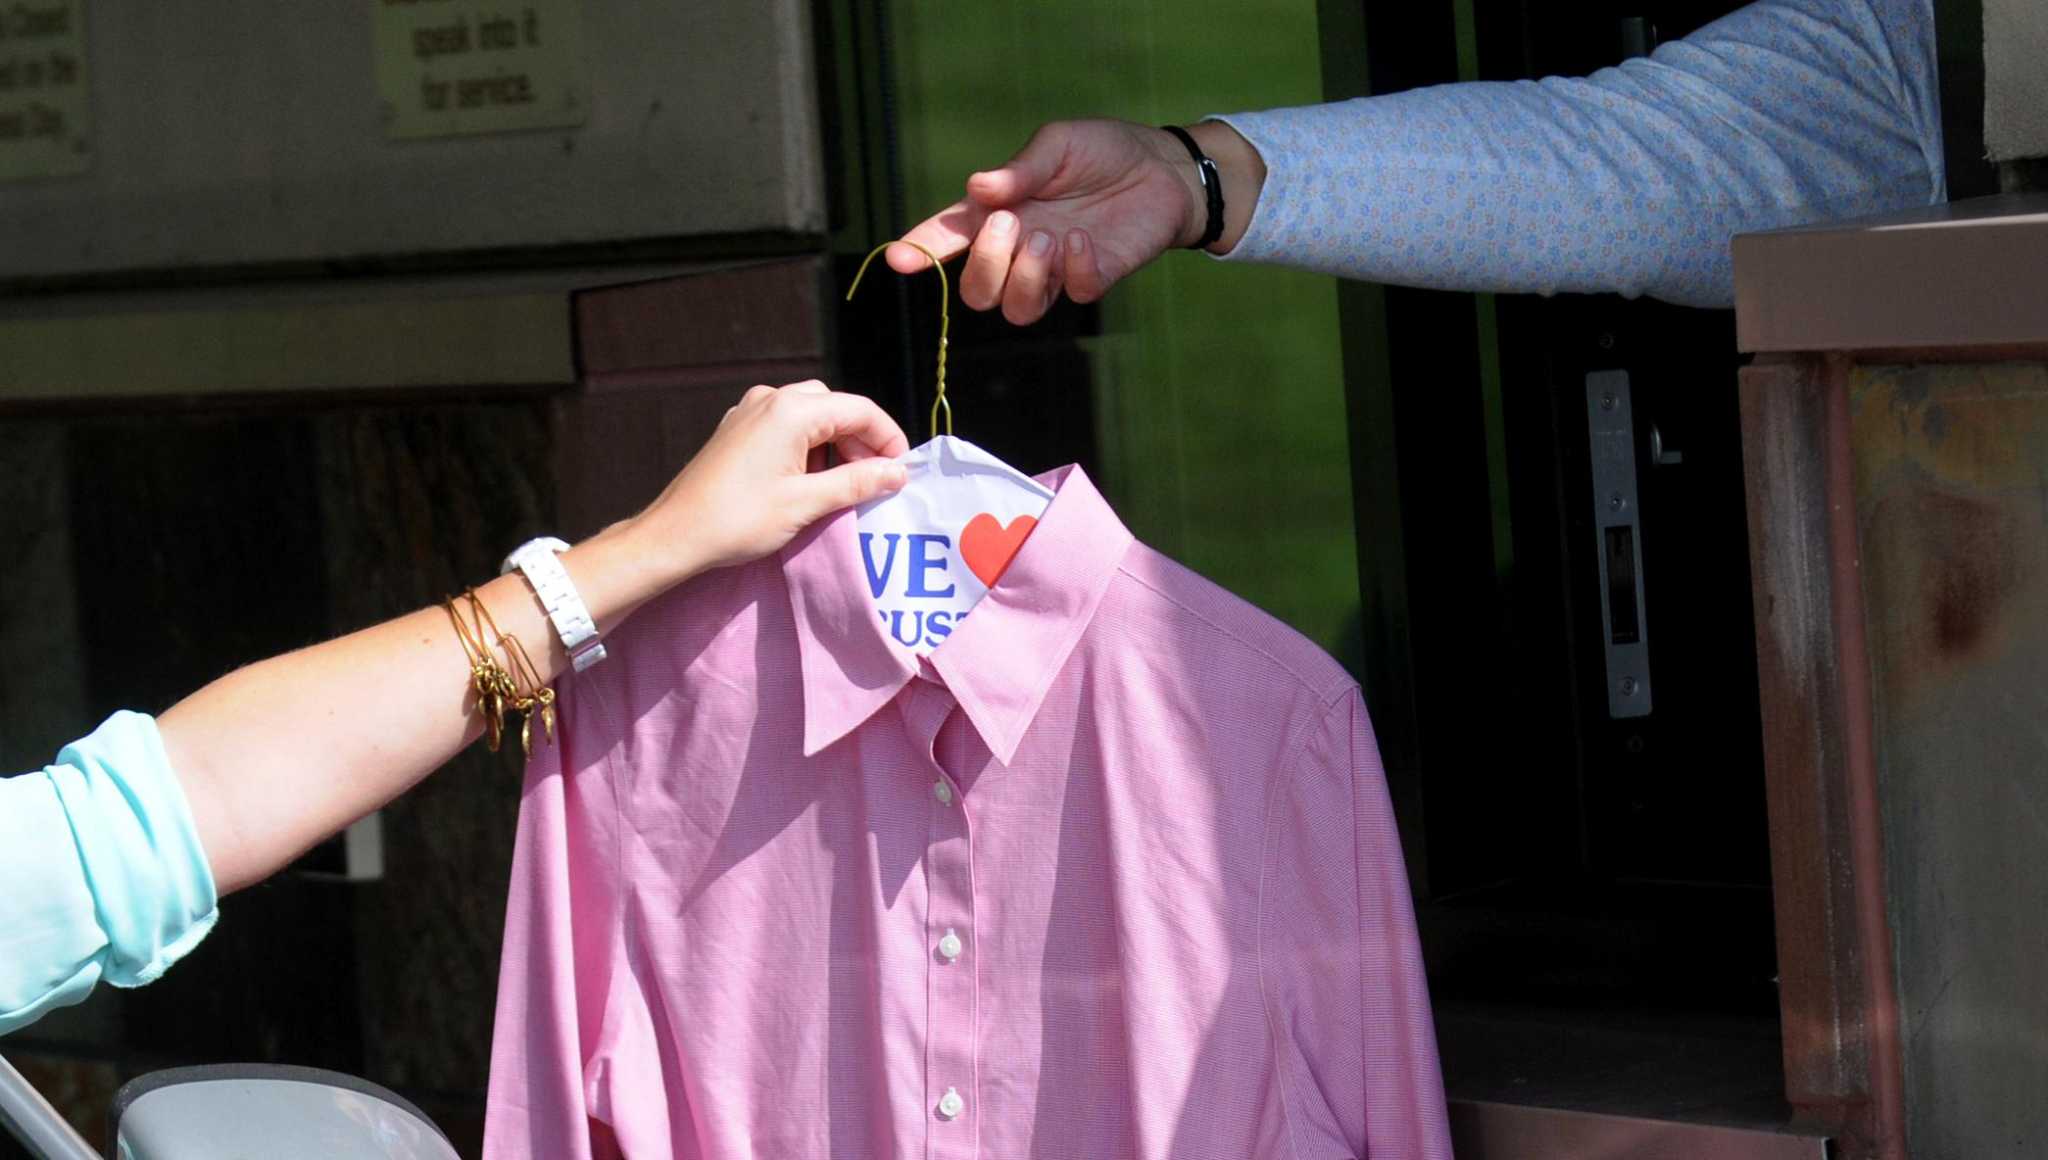 Joe Pisani (opinion): Dry cleaners deserve the shirts off our backs